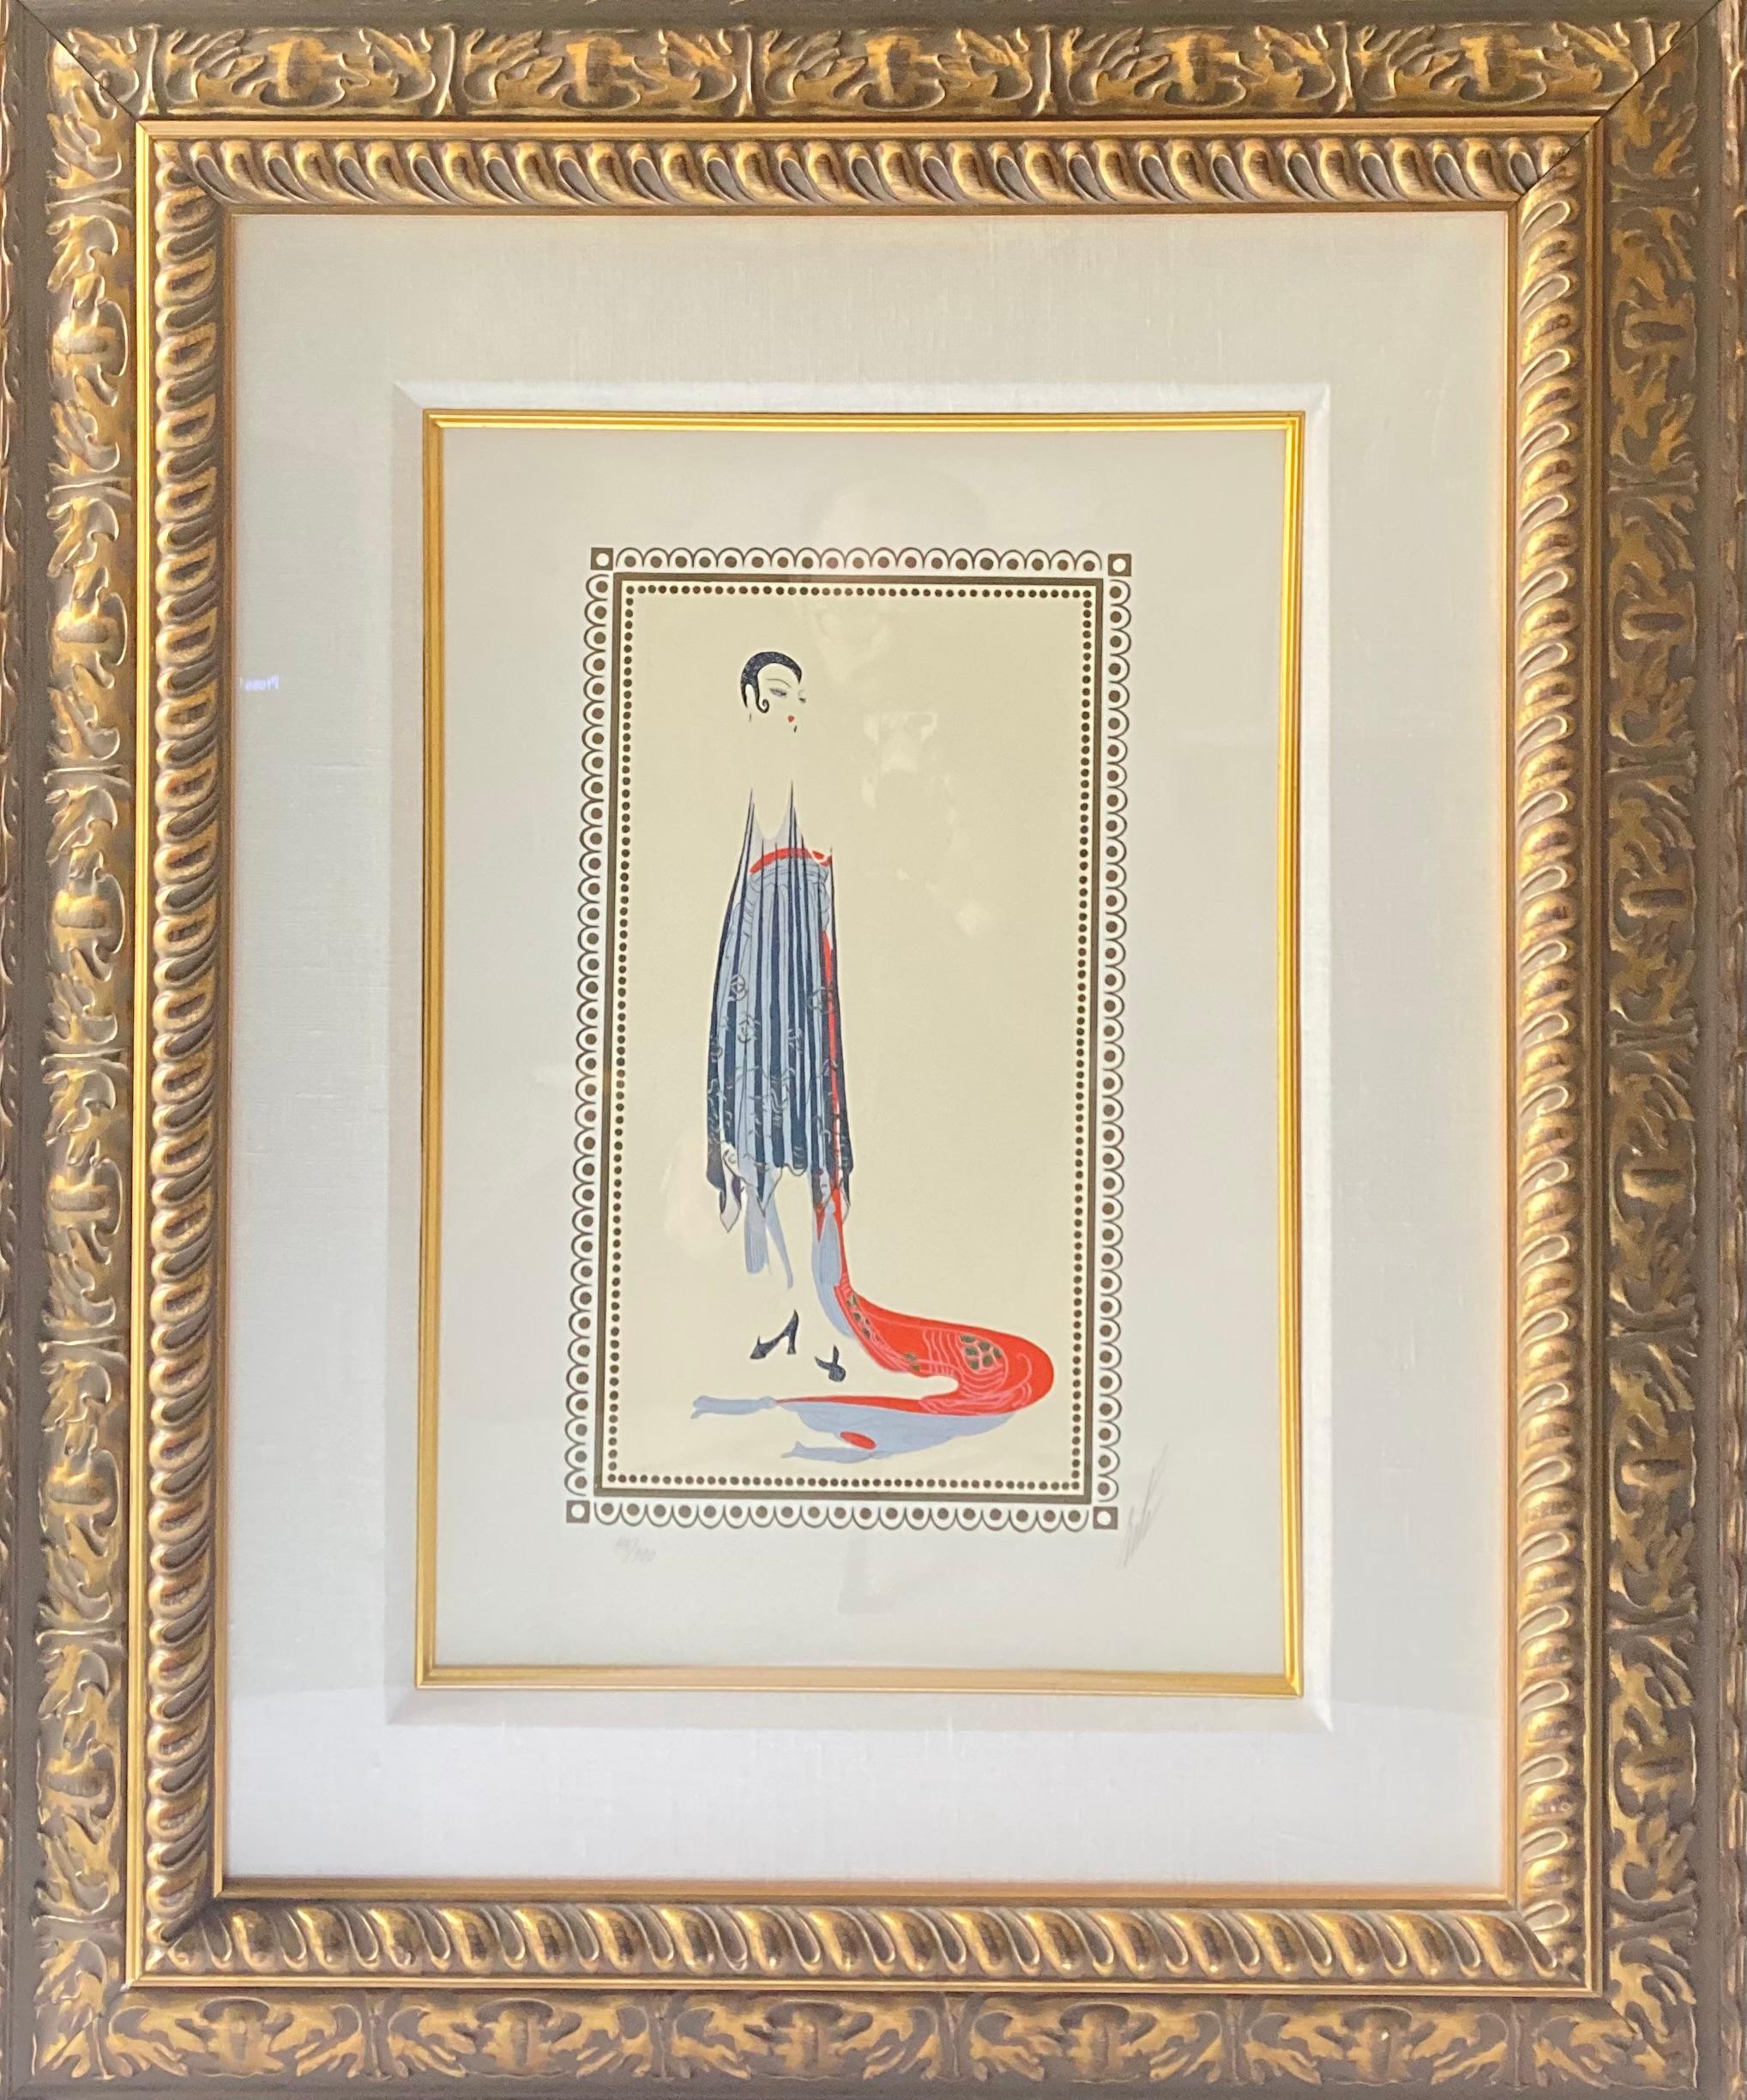 Erte Lithograph in excellent condition
Frame measures 33x27x2
Signed and numbered
made in 1979